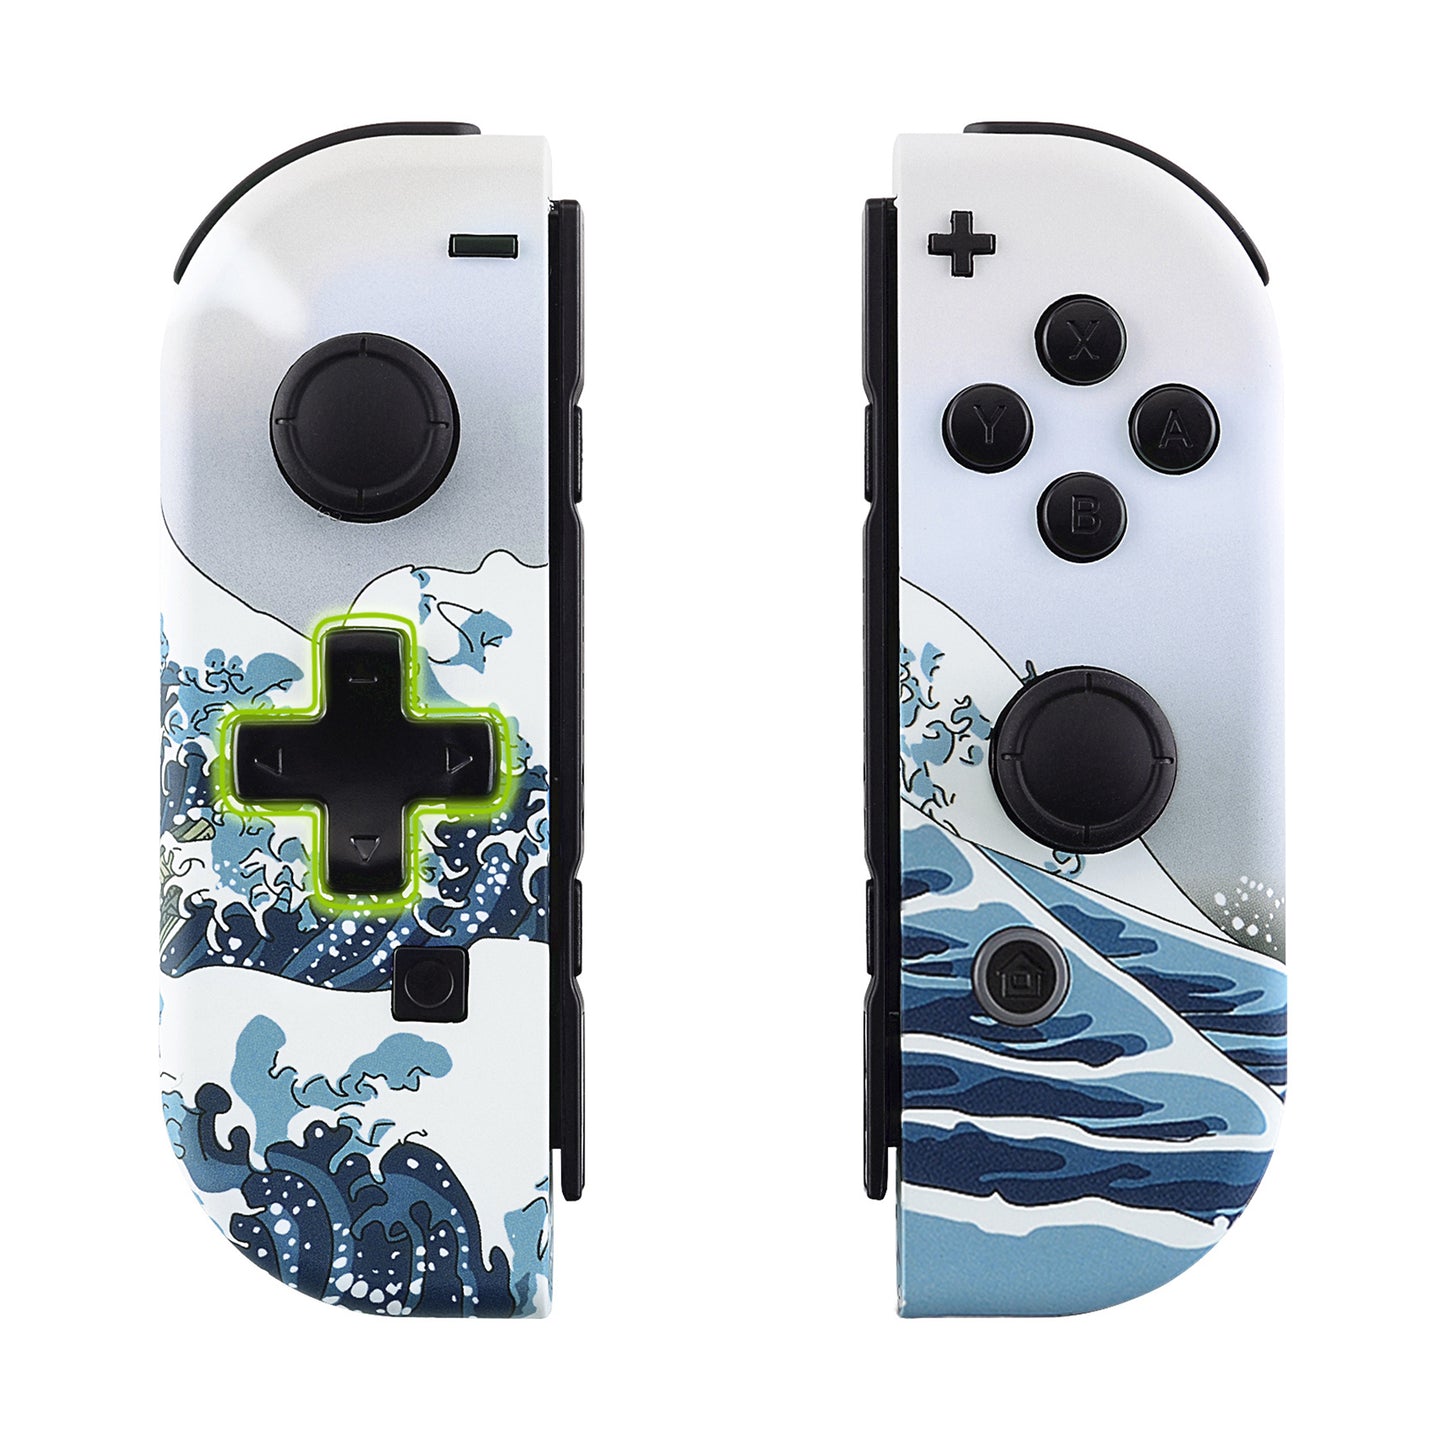 eXtremeRate Dpad Version Replacement Full Set Shell Case with Buttons for Joycon of NS Switch - The Great Wave eXtremeRate